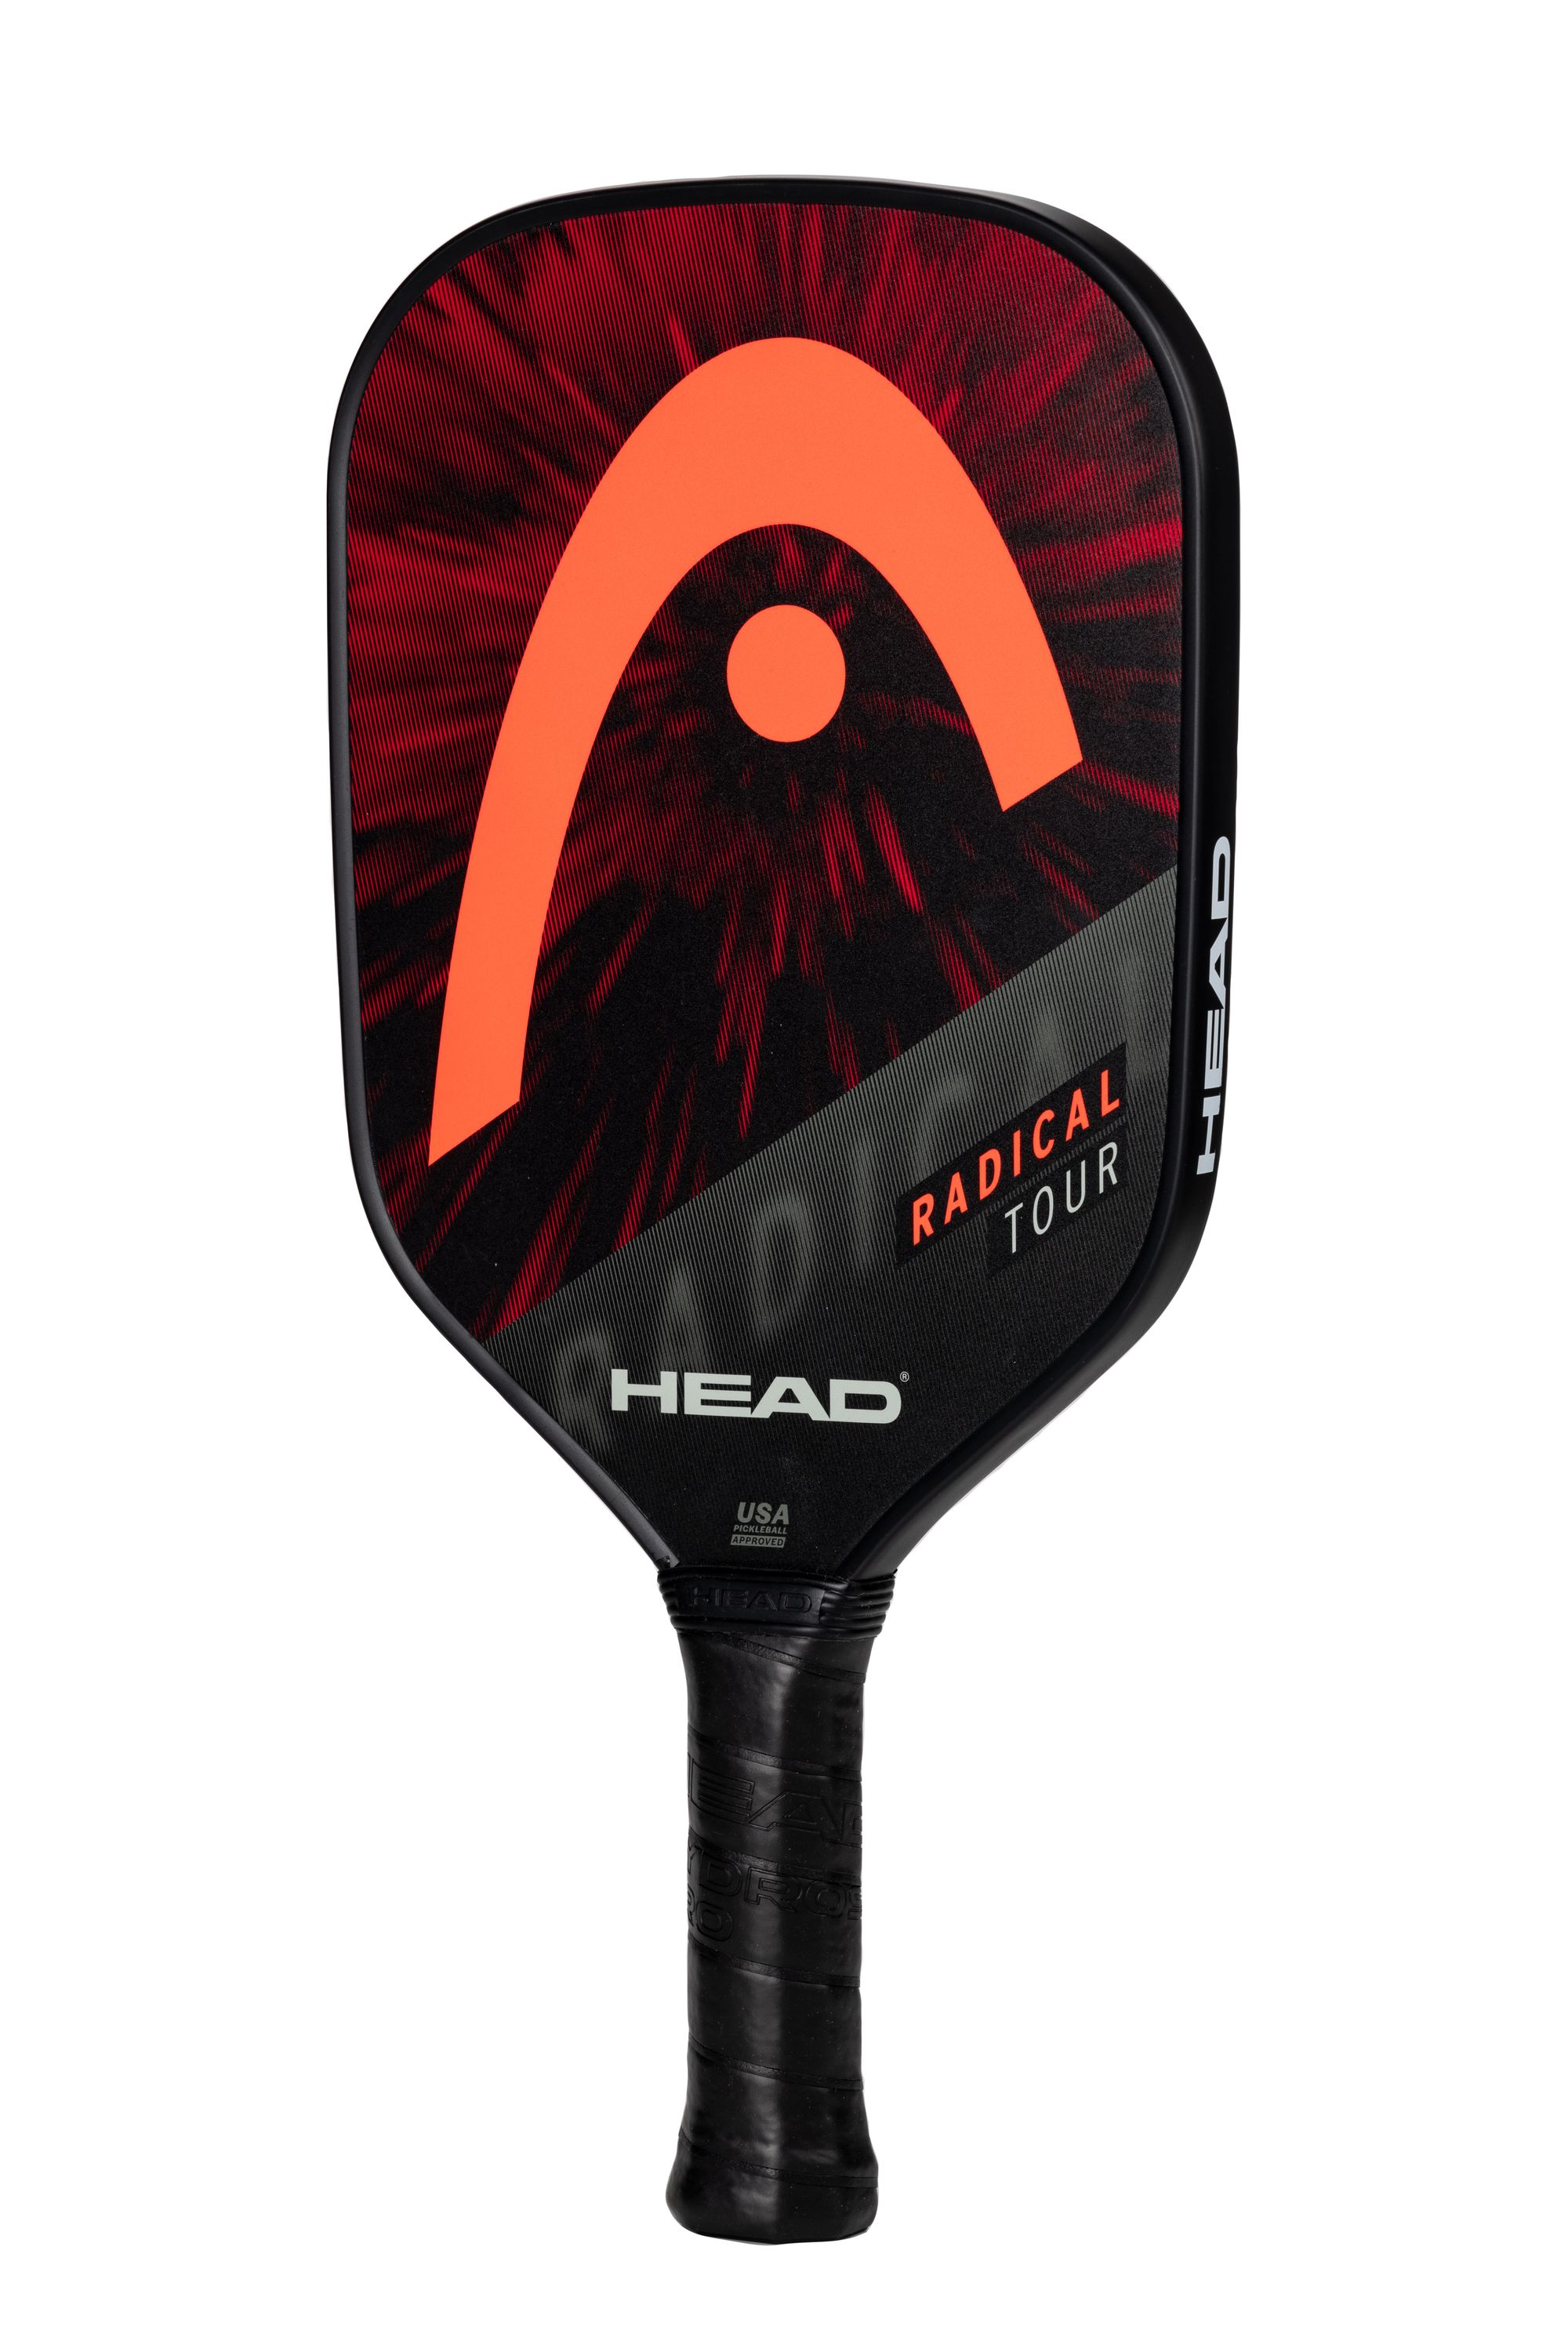 Paddle Review: Head Radical Tour Series